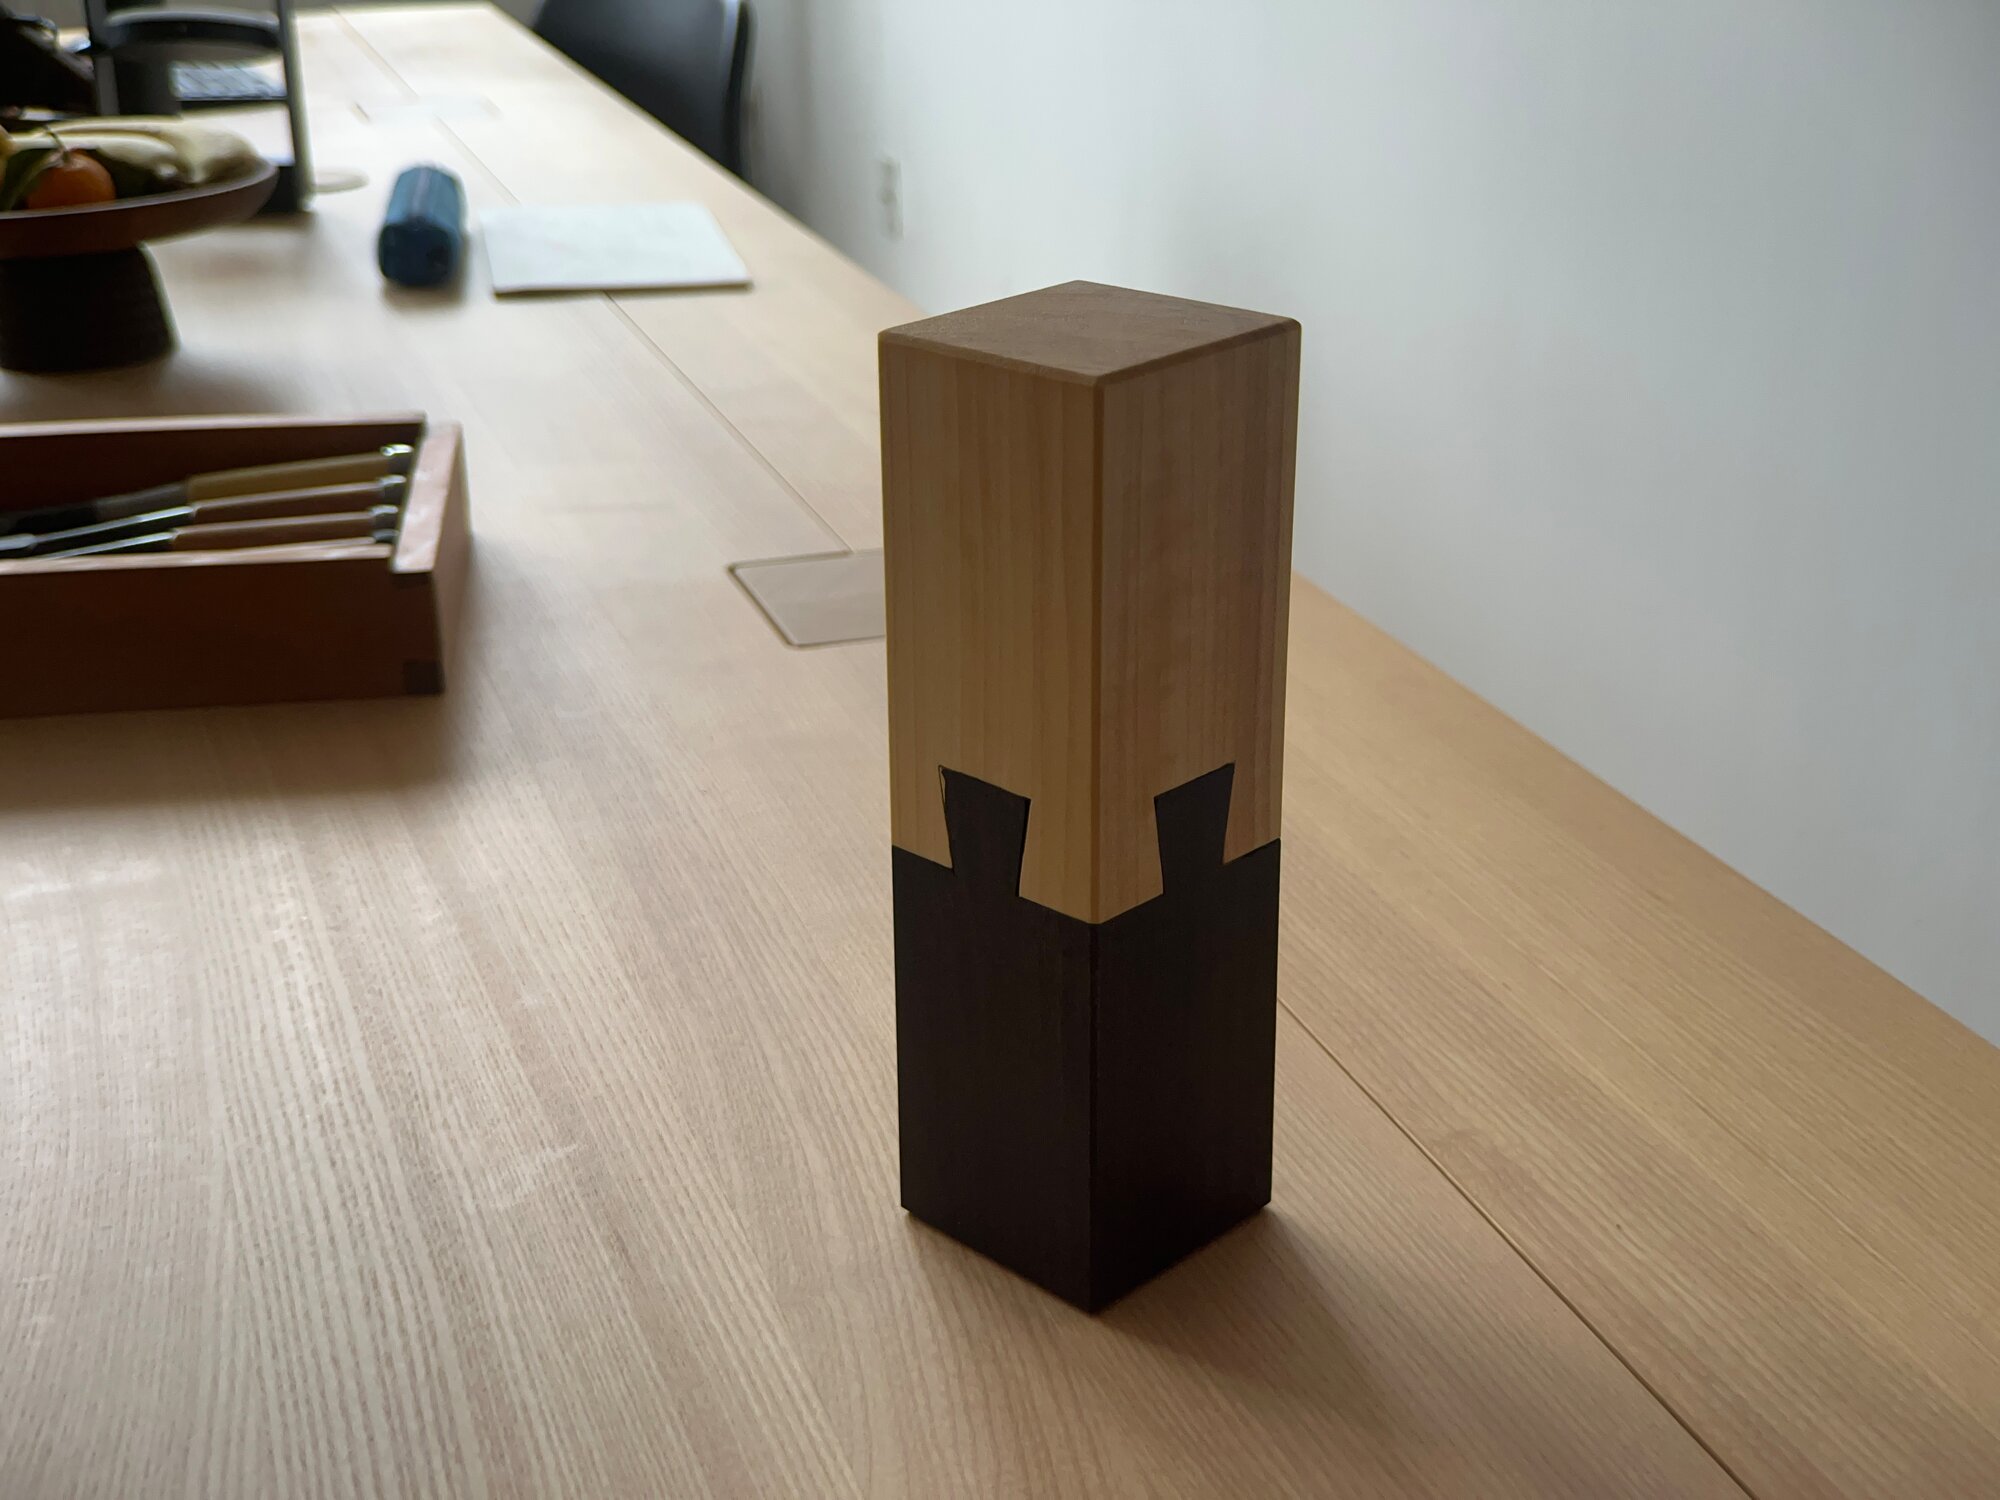 Four-way dovetail joint